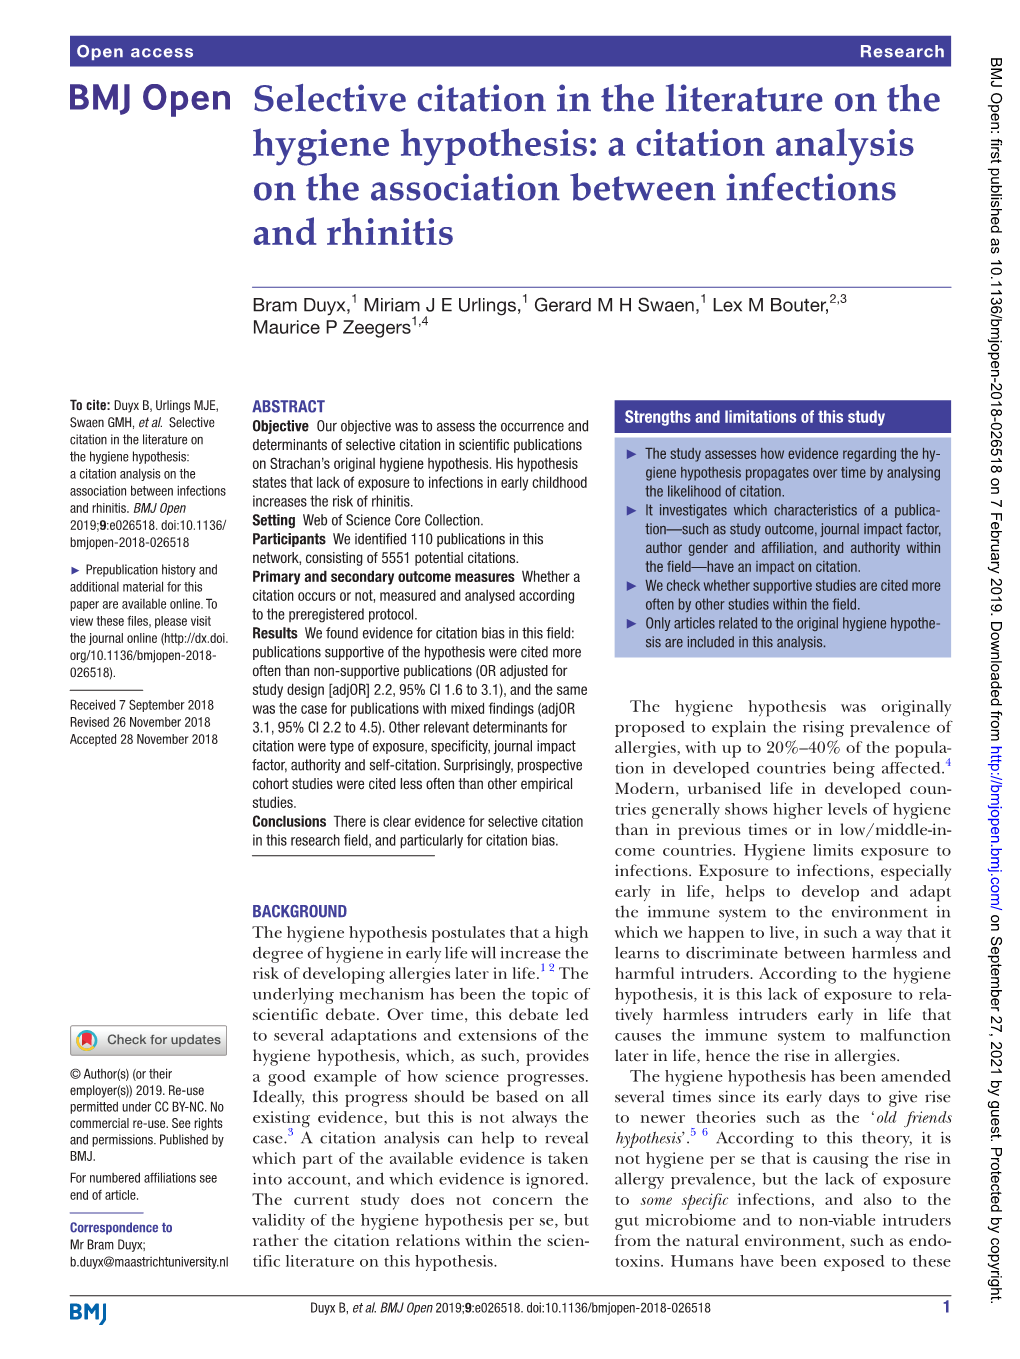 Selective Citation in the Literature on the Hygiene Hypothesis: a Citation Analysis on the Association Between Infections and Rhinitis